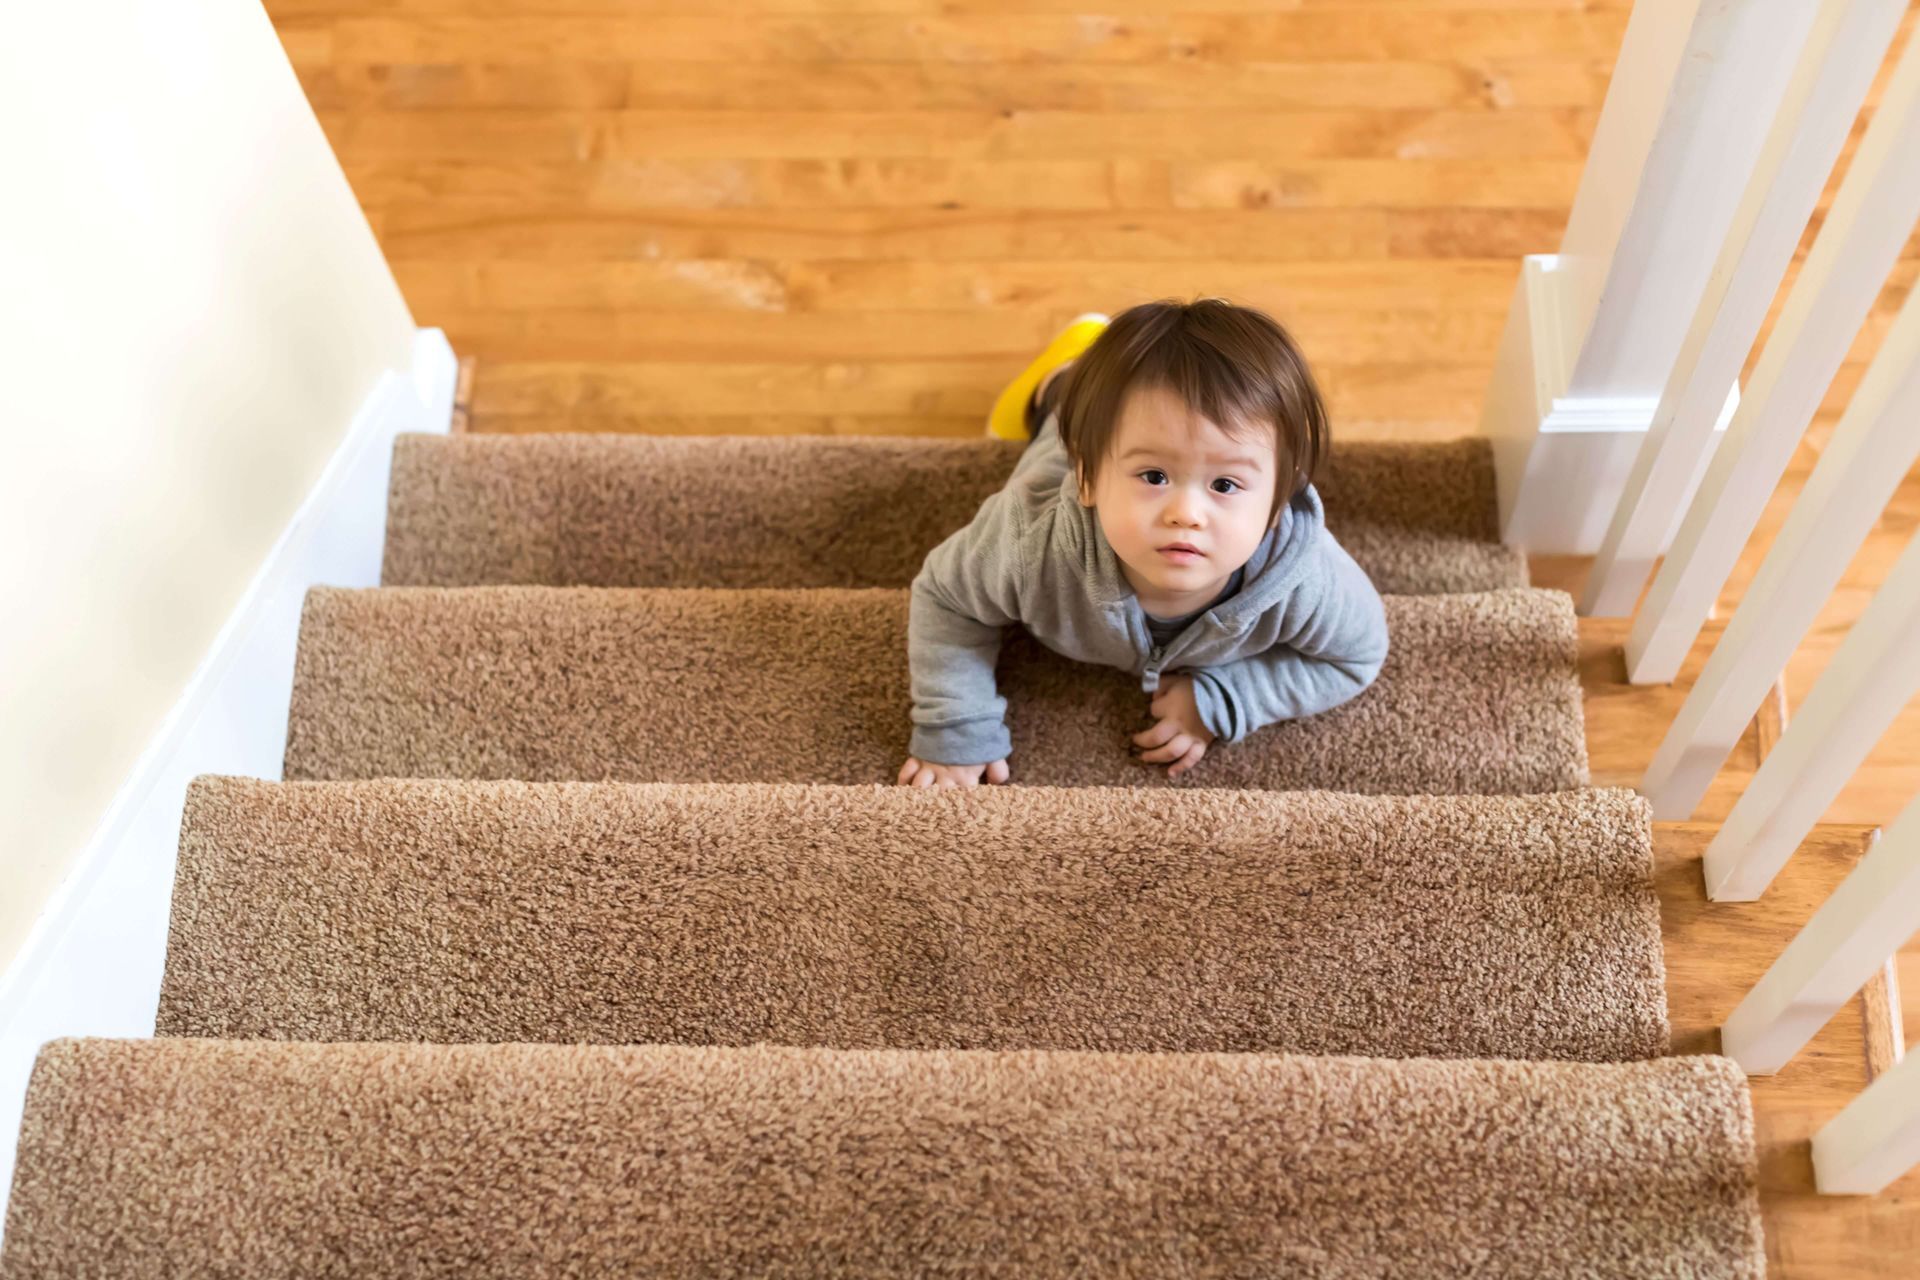 stairway safety, banister, stairwell, prevent climbing, stair safety in cary nc